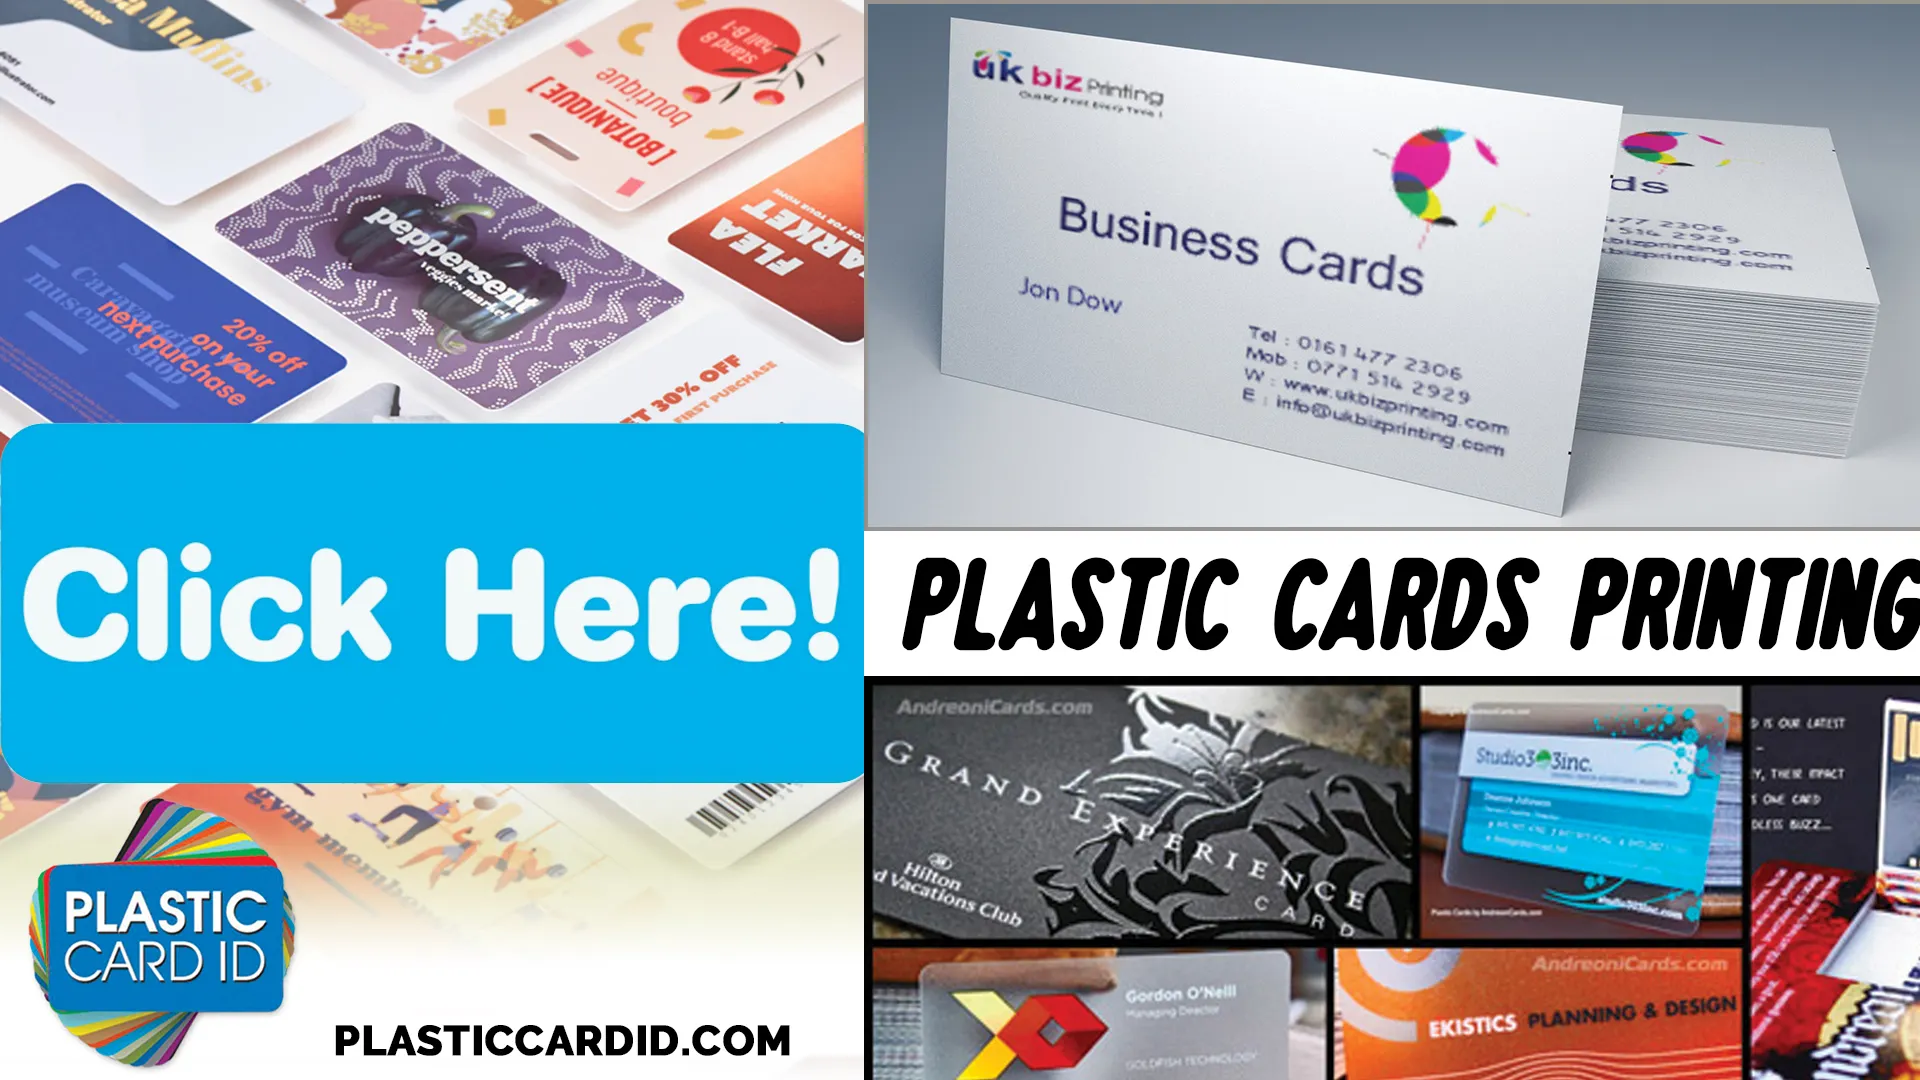 Welcome to Plastic Card ID




, Your Expert in Consumer Trend Insights for Card Usage